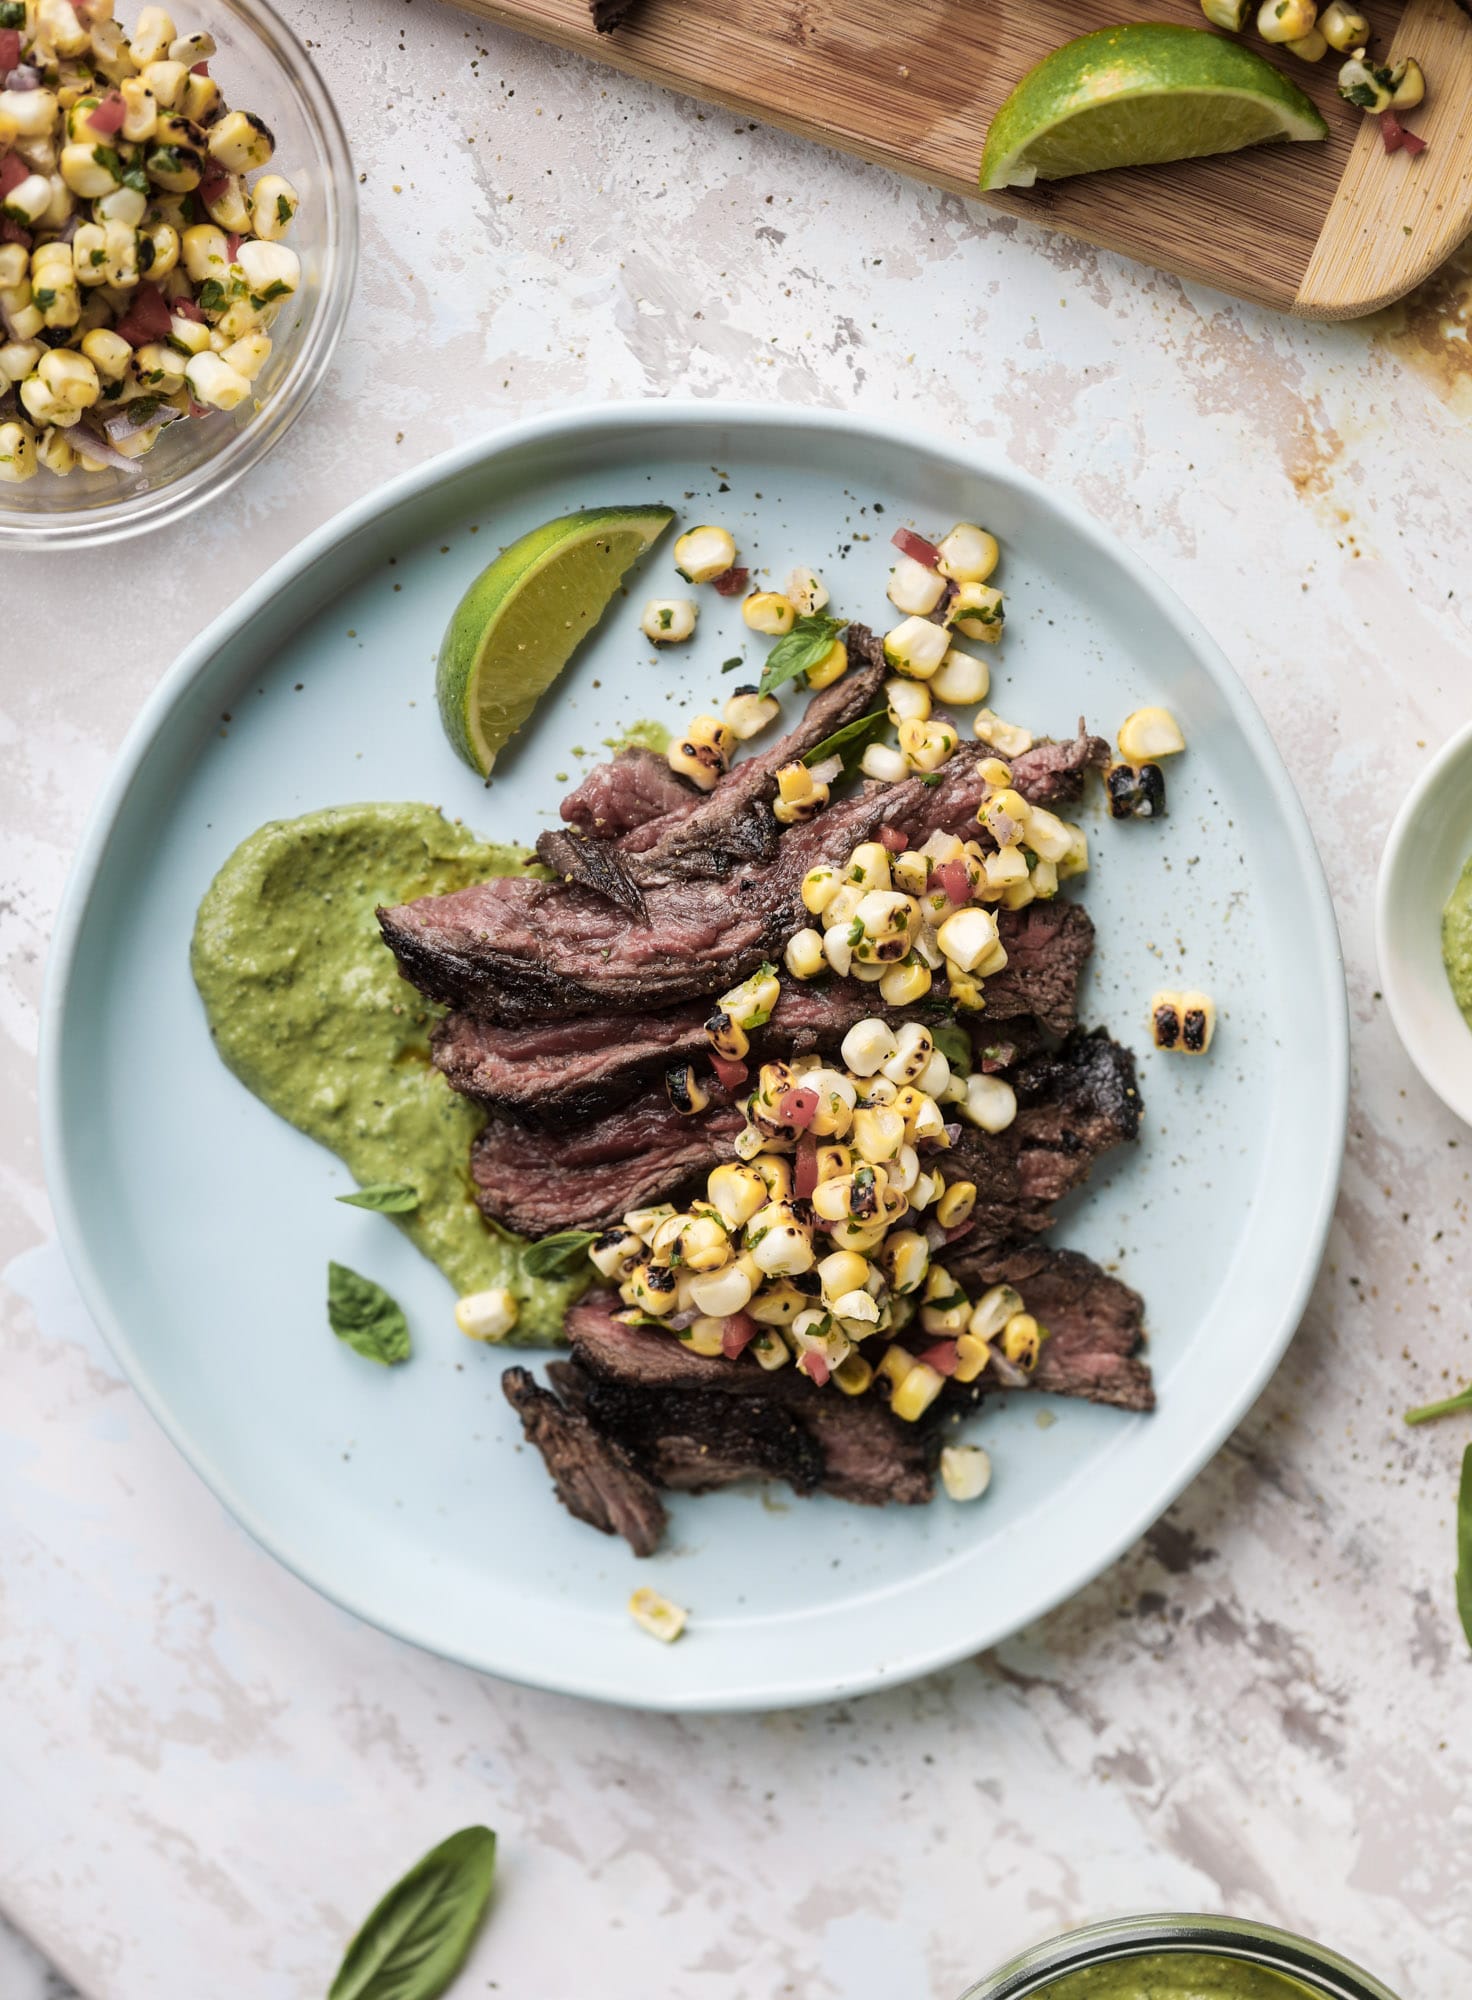 This skirt steak recipe is so super easy and delicious! Marinate it for a bit, prepare it to your liking then serve it with the most flavorful avocado pesto and grilled corn relish. Feels like a fancy restaurant meal and will make you love skirt steak forever! I howsweeteats.com #skirt #steak #avocado #pesto #corn #relish #recipes